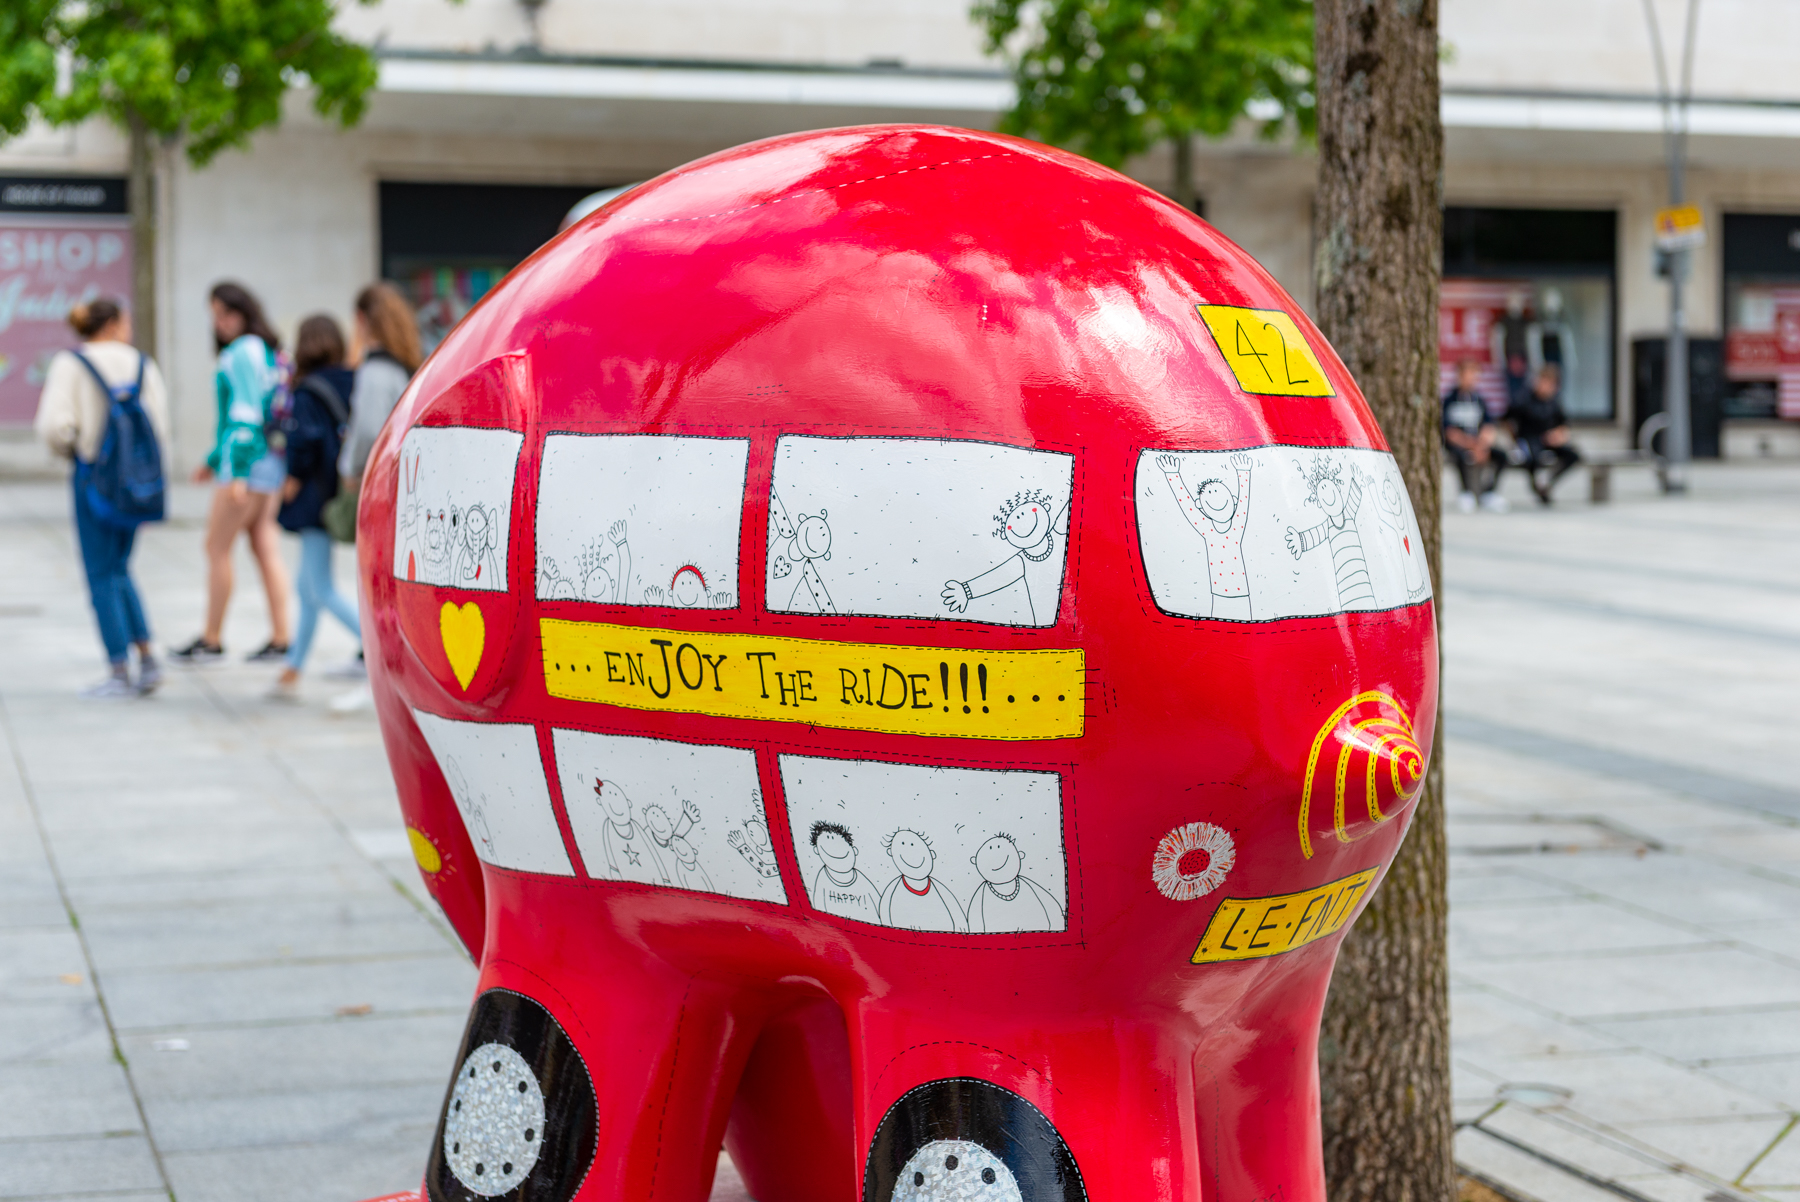 'The Patchwork Bus' by Traci Moss. Sponsored by Plymouth Citybus - Image 6 of 9